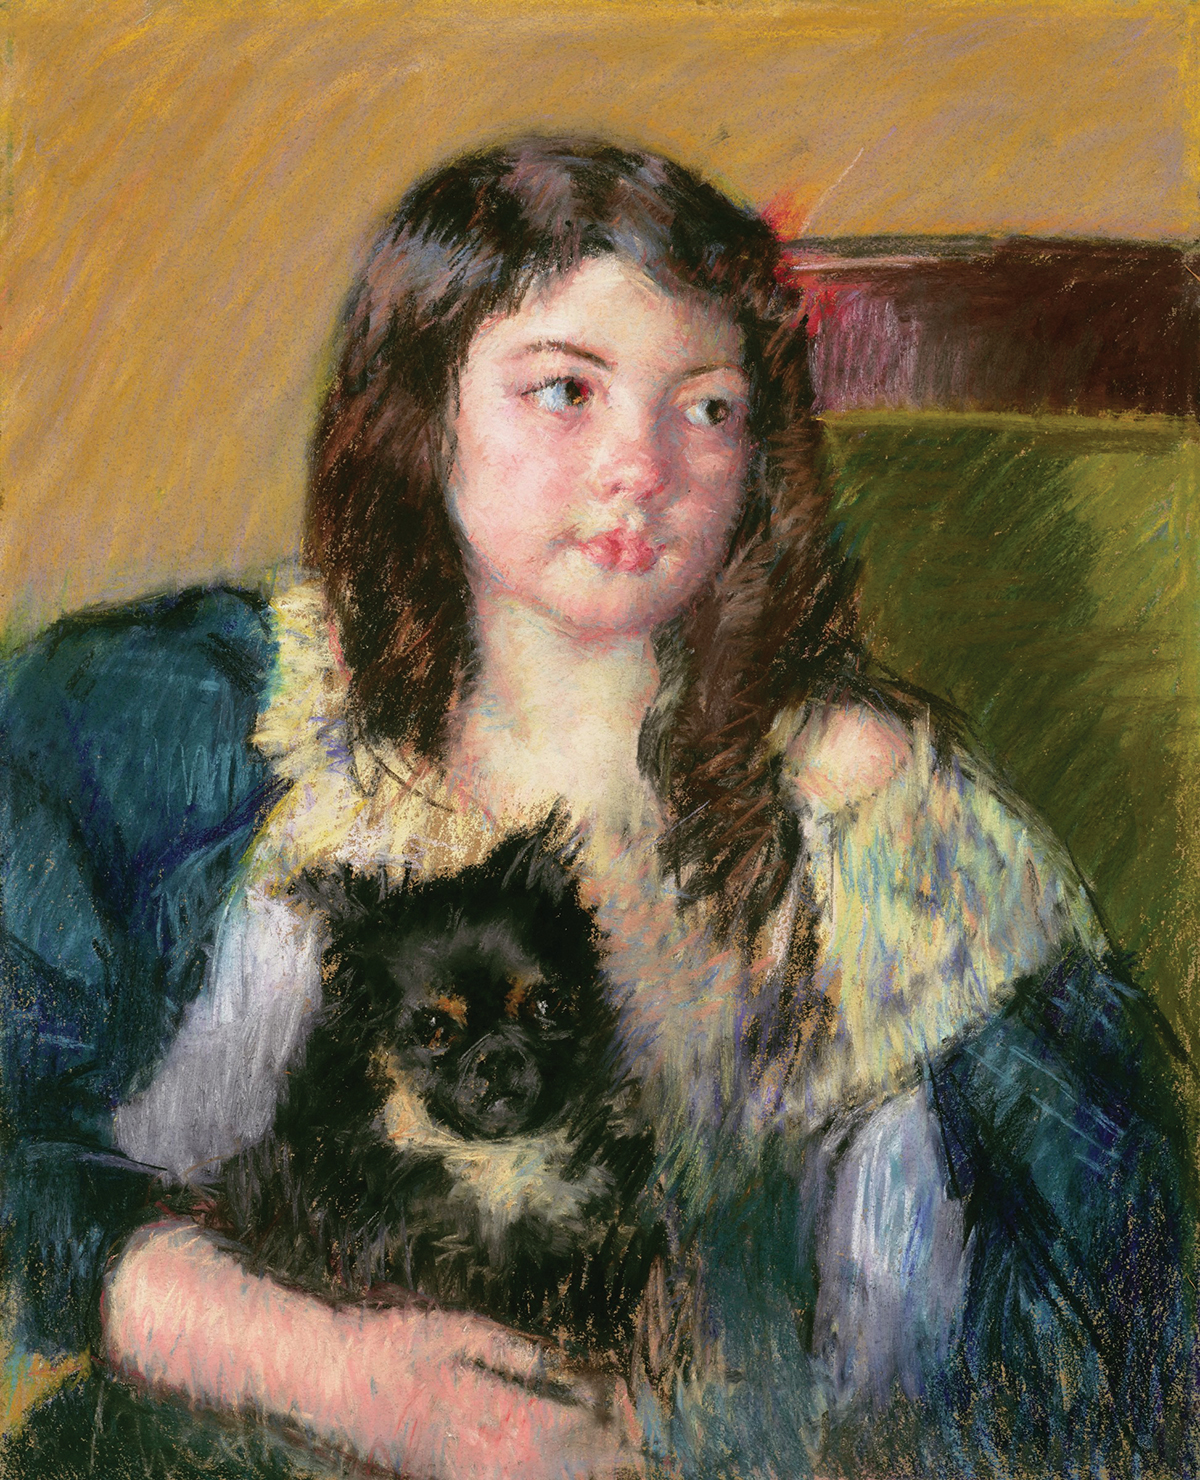 Drawing of a young girl sitting on a green upholstered chair holding a small black dog.